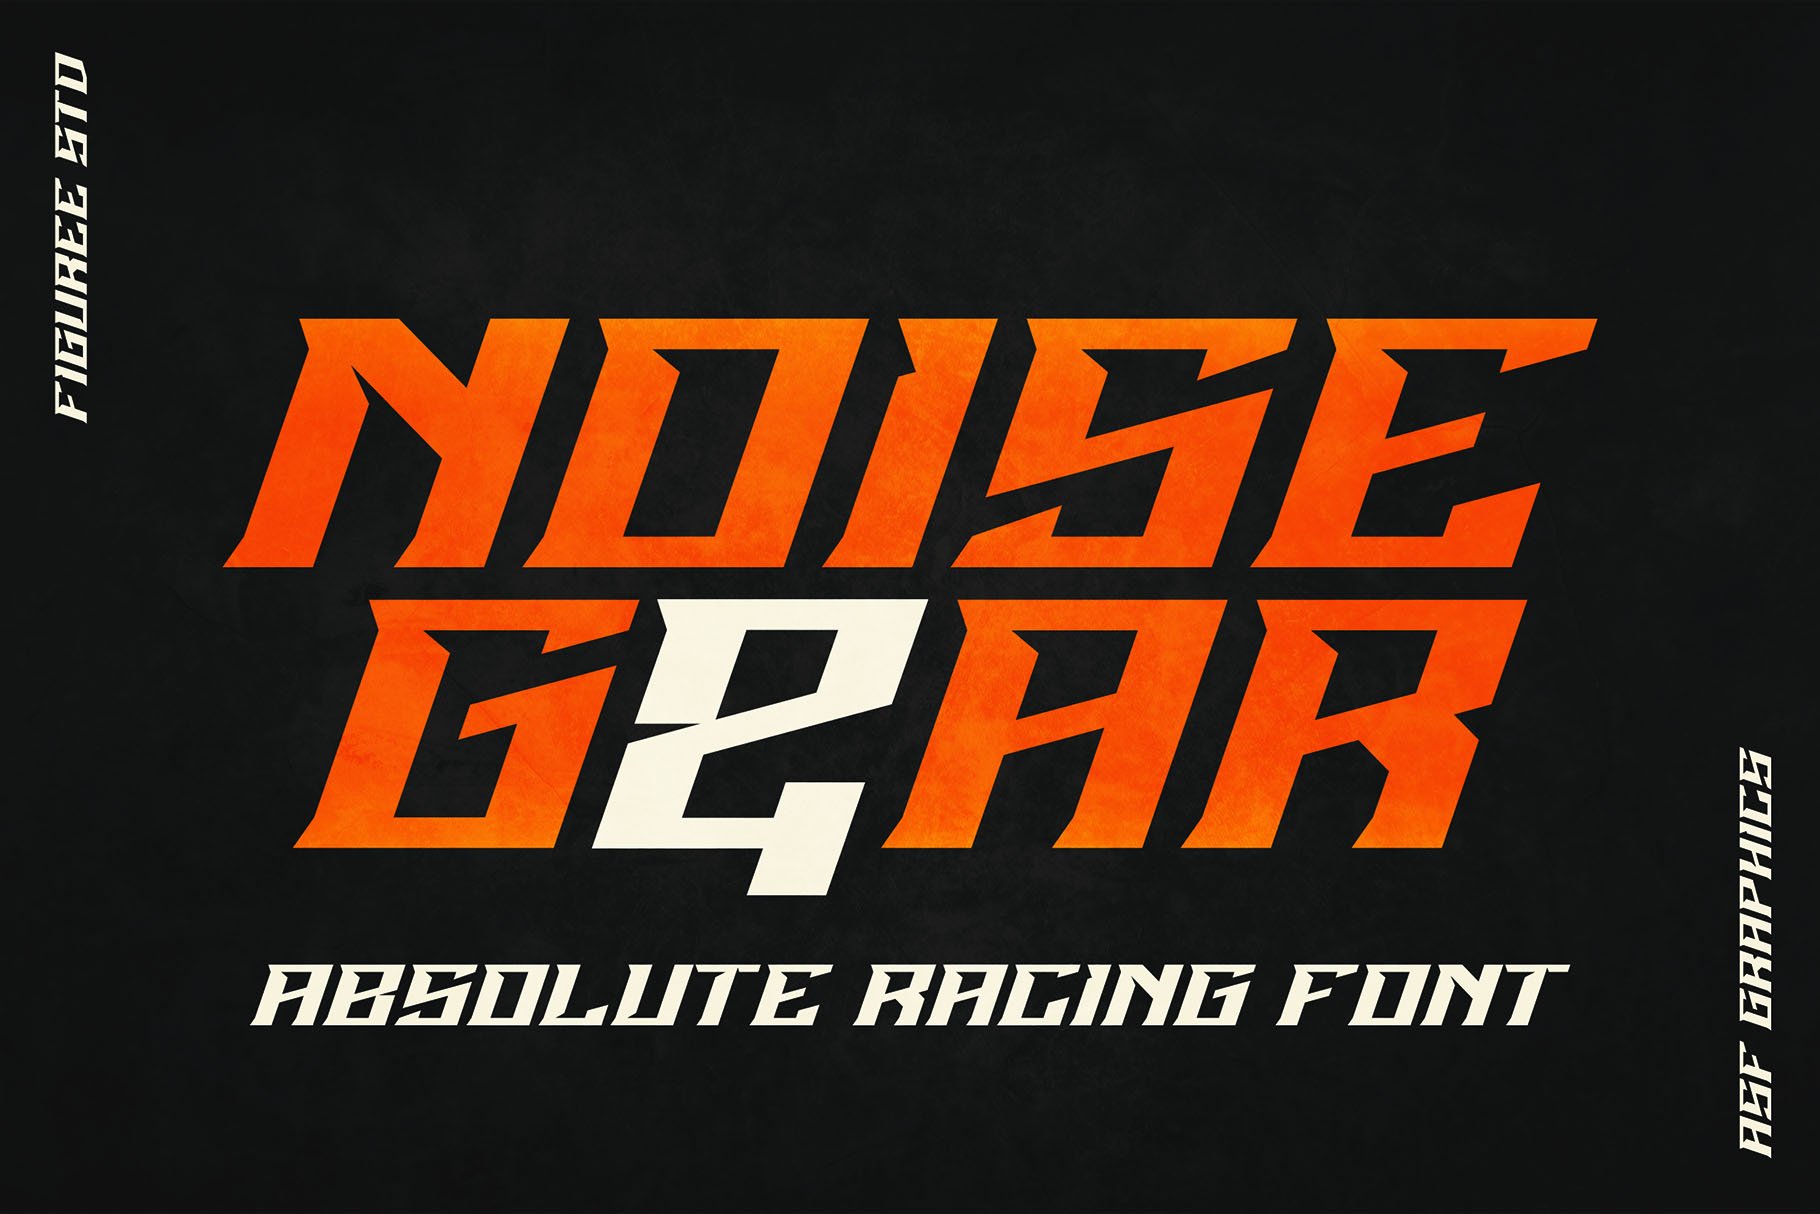 Noise Gear - Absolute Racing Font cover image.